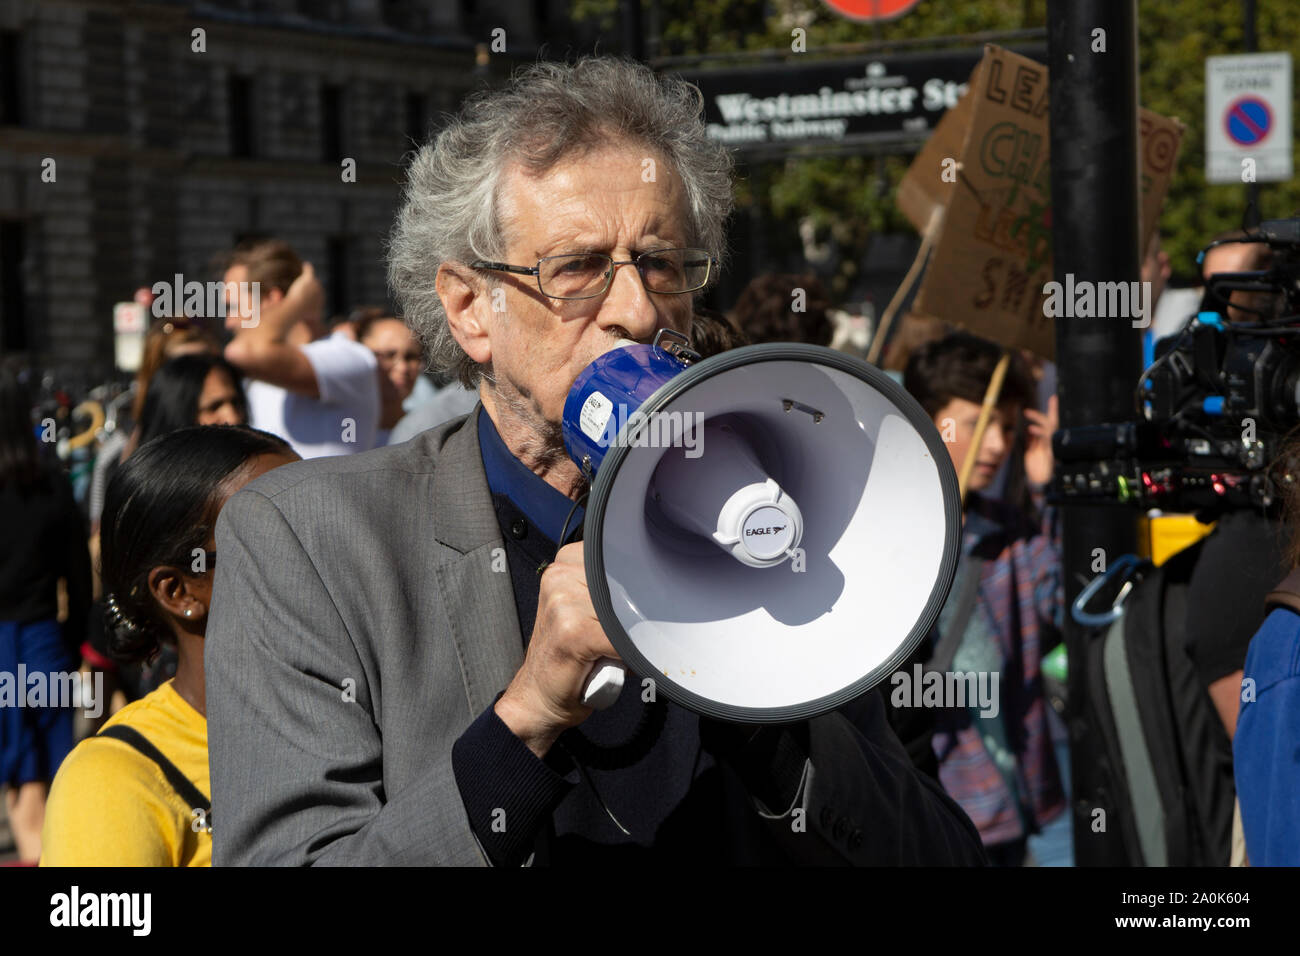 Westminster, London UK. 20 September 2019. Global Climate Strike Protest: Piers Corbyn, brother of Labour leader Jeremy Corbyn MP outside Parliament. Stock Photo